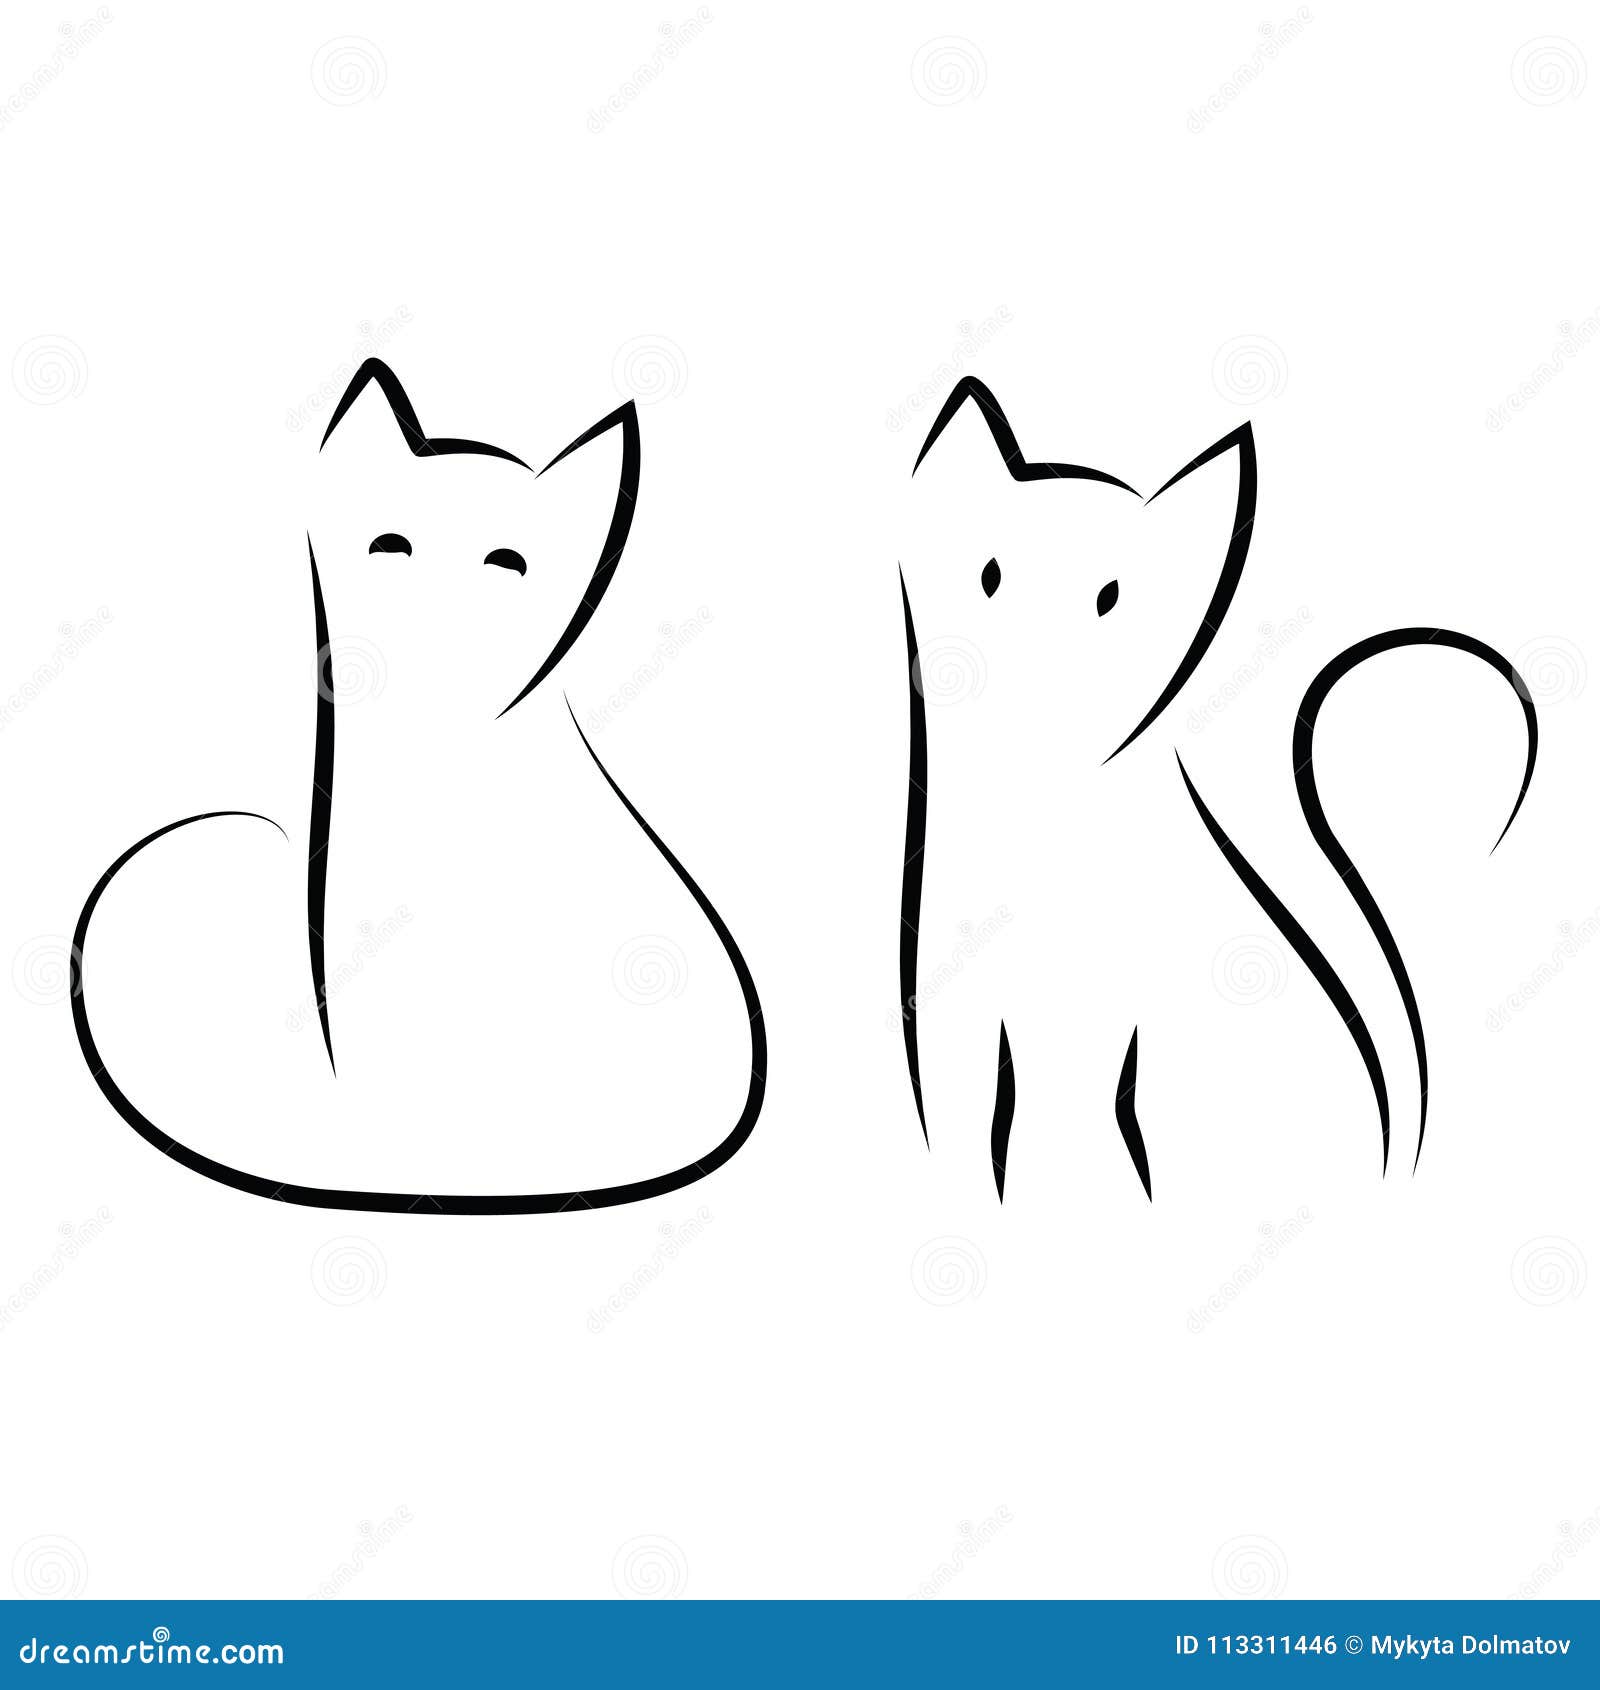 two happy cats silhouettes. Simple ink drawing sitting cats cute